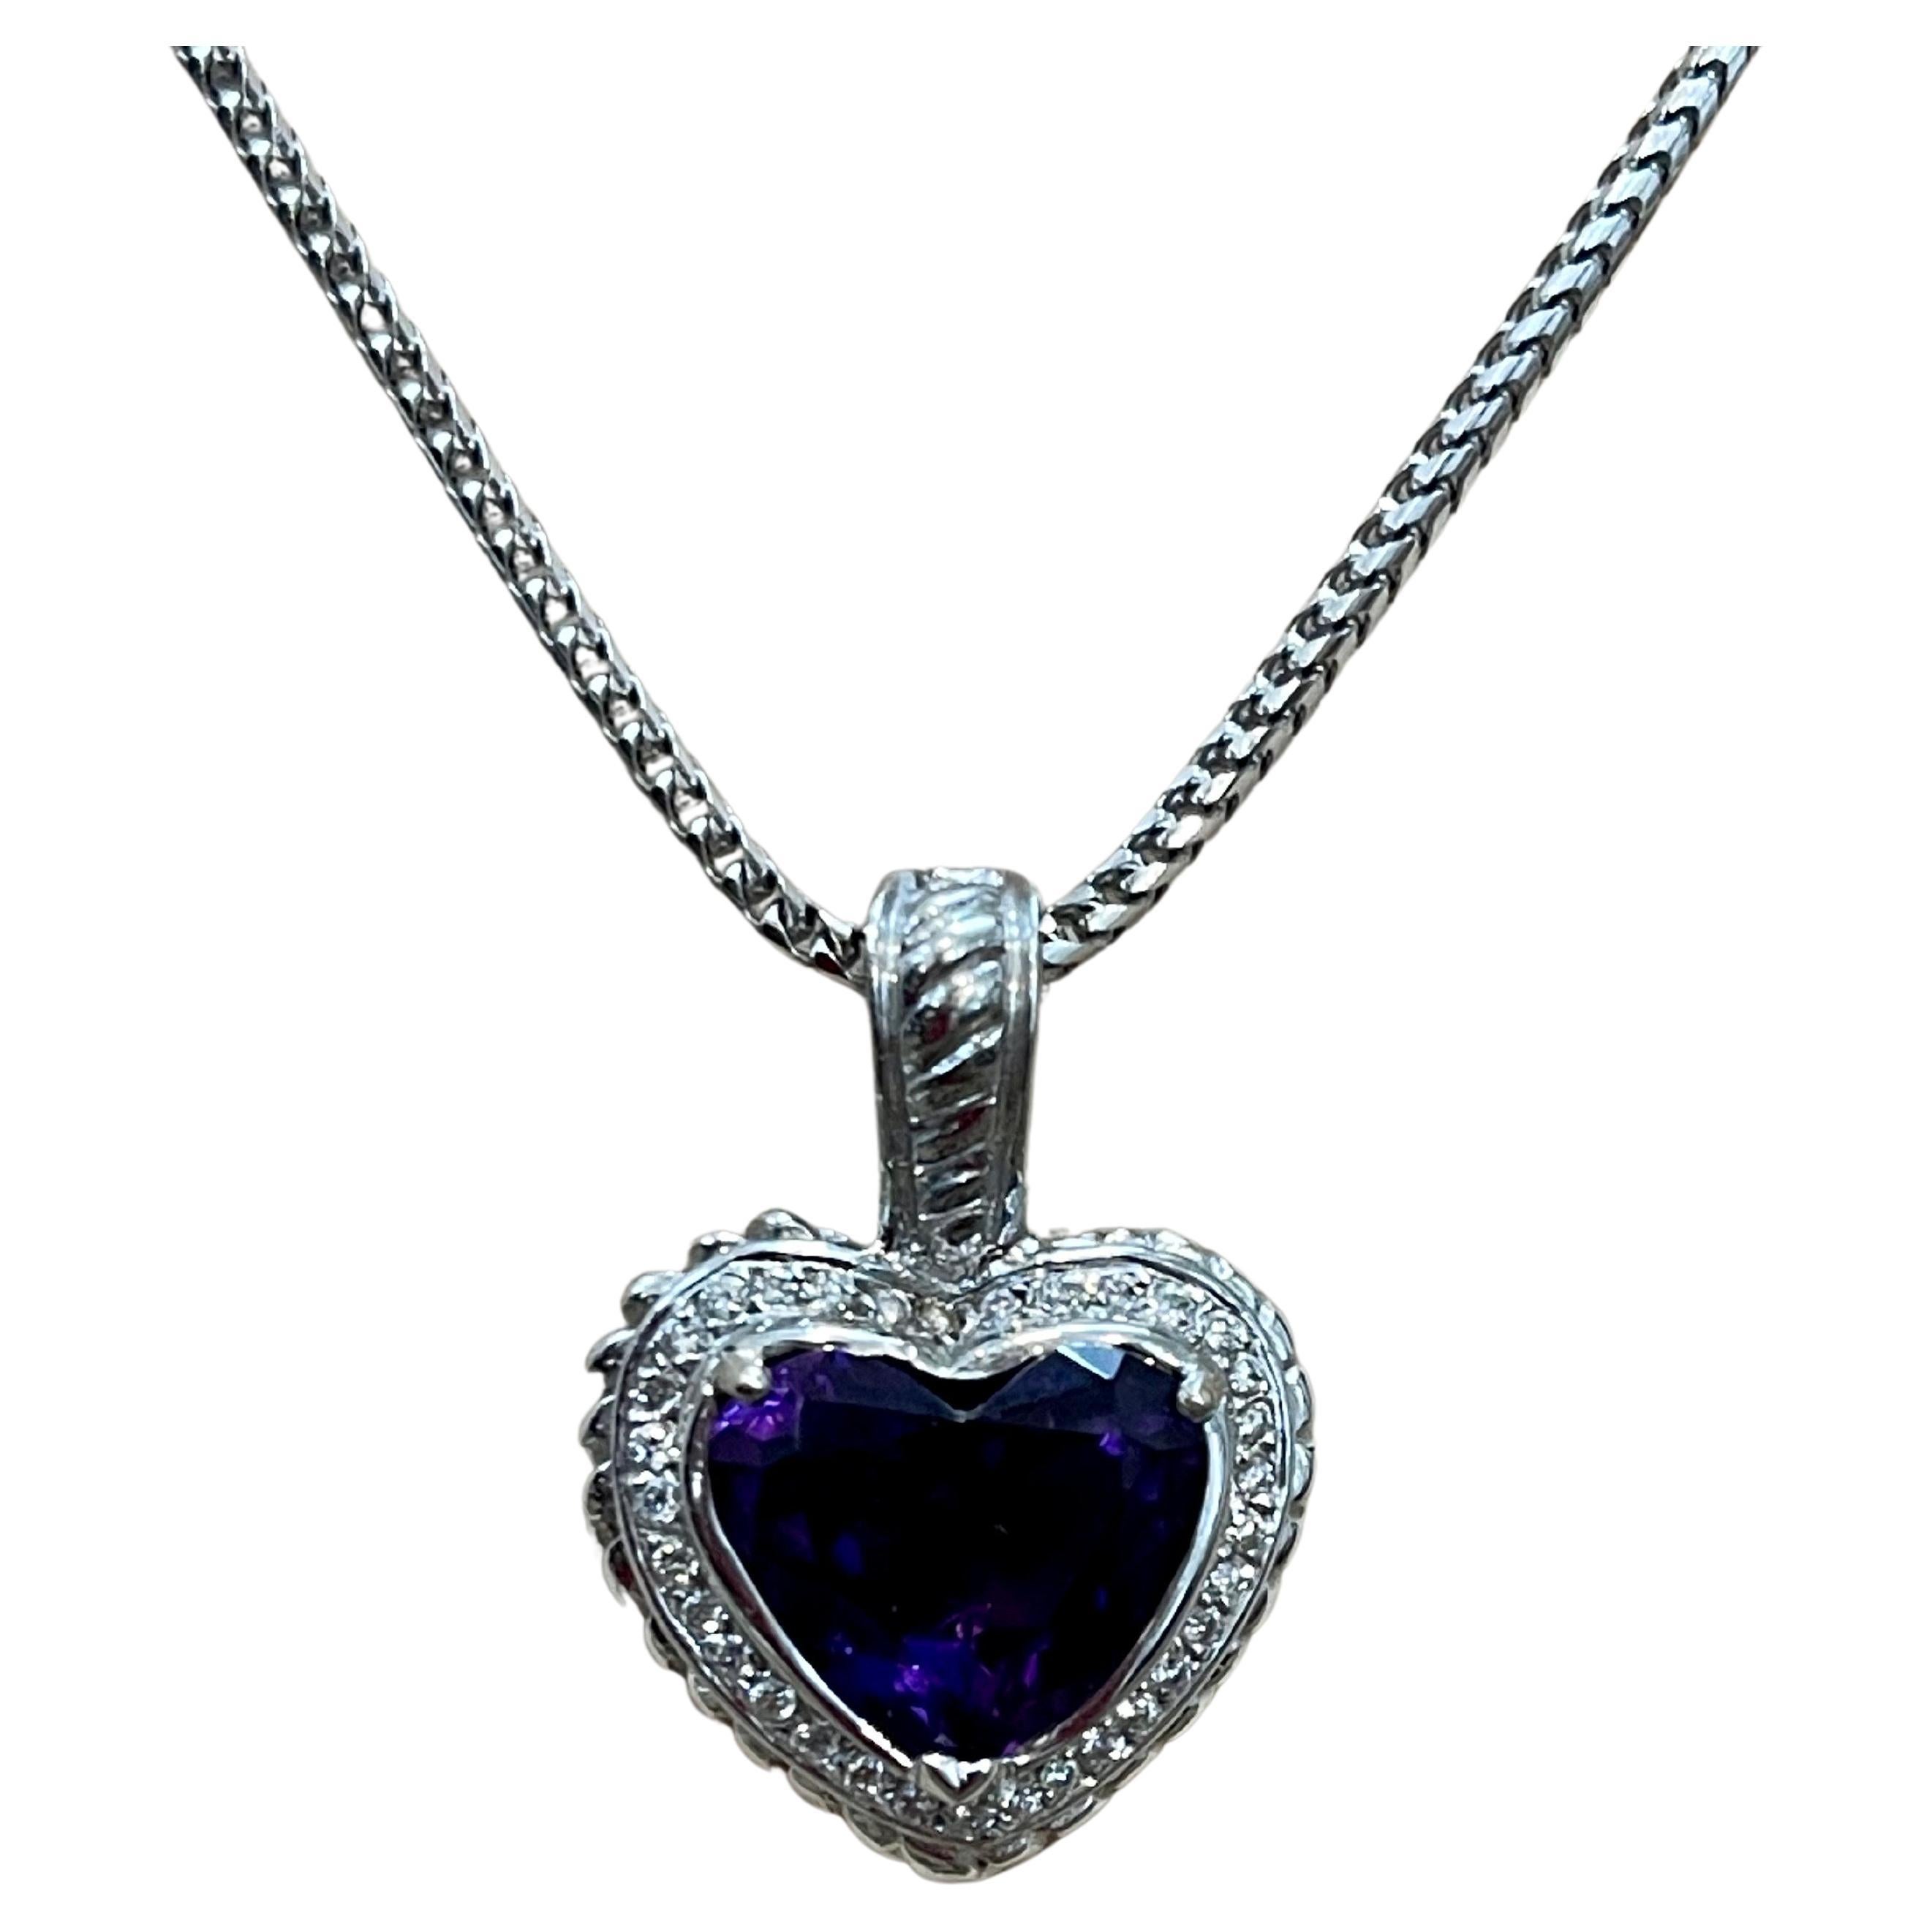   Approximately 10 Carat Heart Shape Amethyst & 1 Ct Diamond Pendant Necklace 18 Kt/14 Kt White Gold
This spectacular Pendant Necklace  consisting of a single large Perfect heart shape Amethyst , approximately 10 Carat.  The  Amethyst   Has